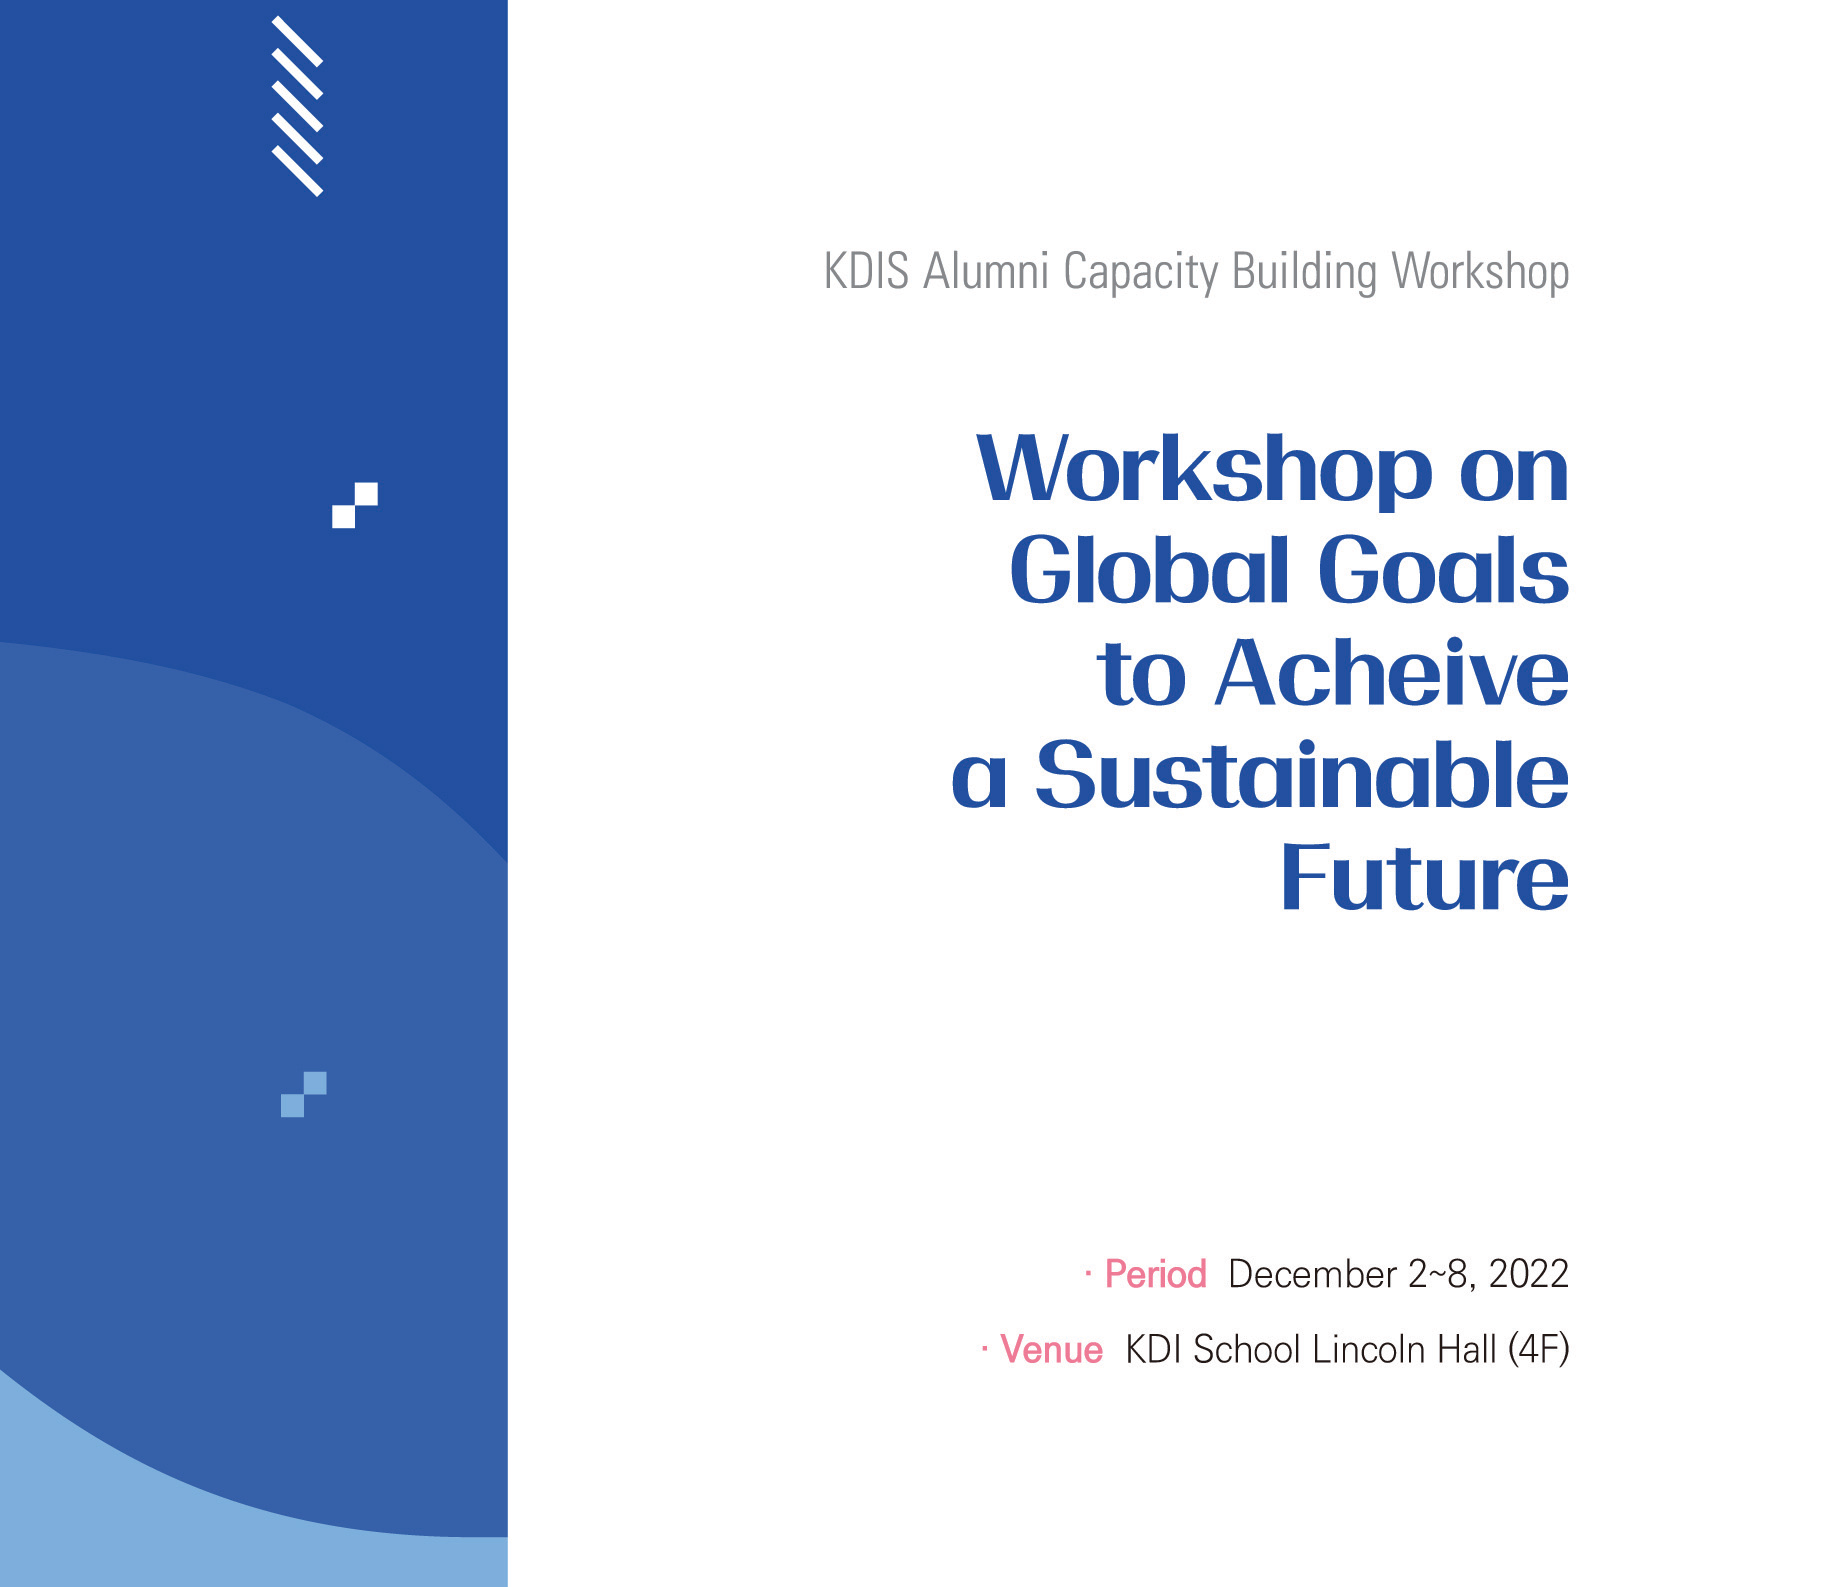 Workshop on Global Goals to Achieve a Sustainable Future (Dec 2~8)